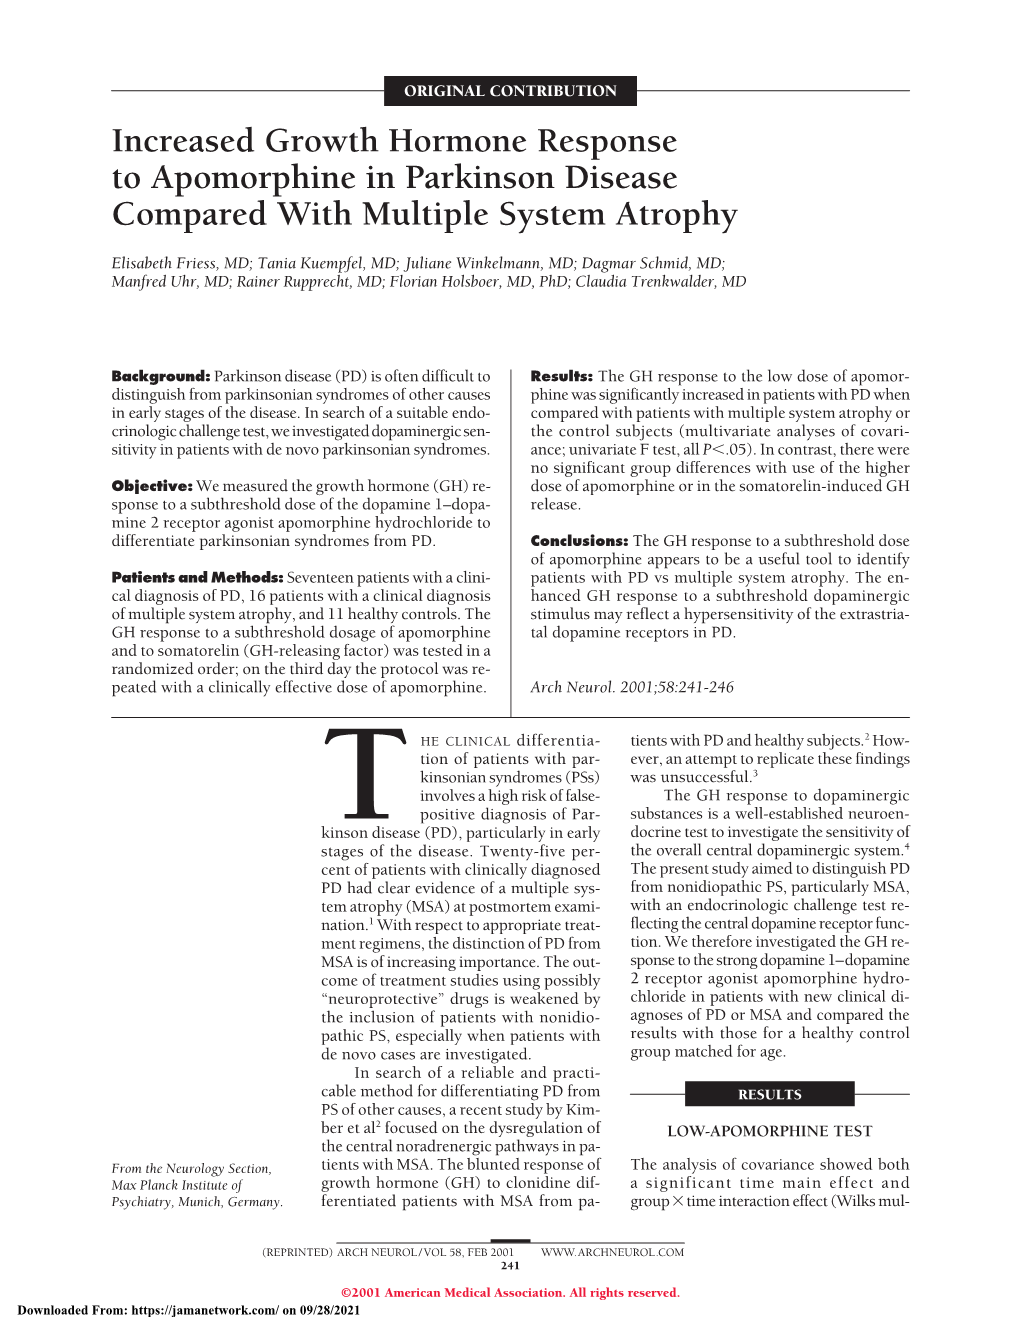 Increased Growth Hormone Response to Apomorphine in Parkinson Disease Compared with Multiple System Atrophy